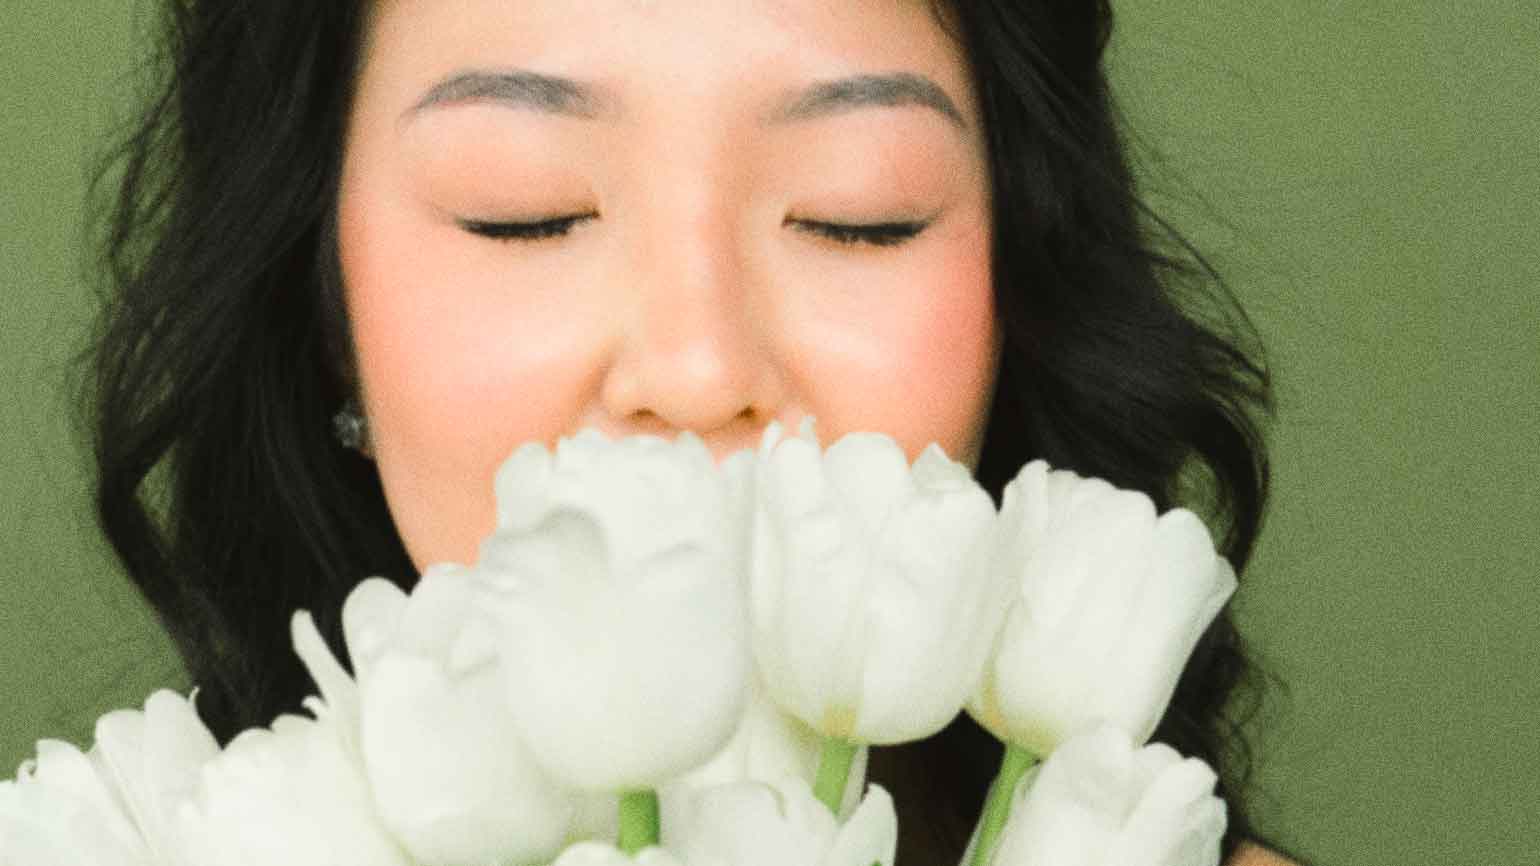 A woman smells white tulips in order to find joy